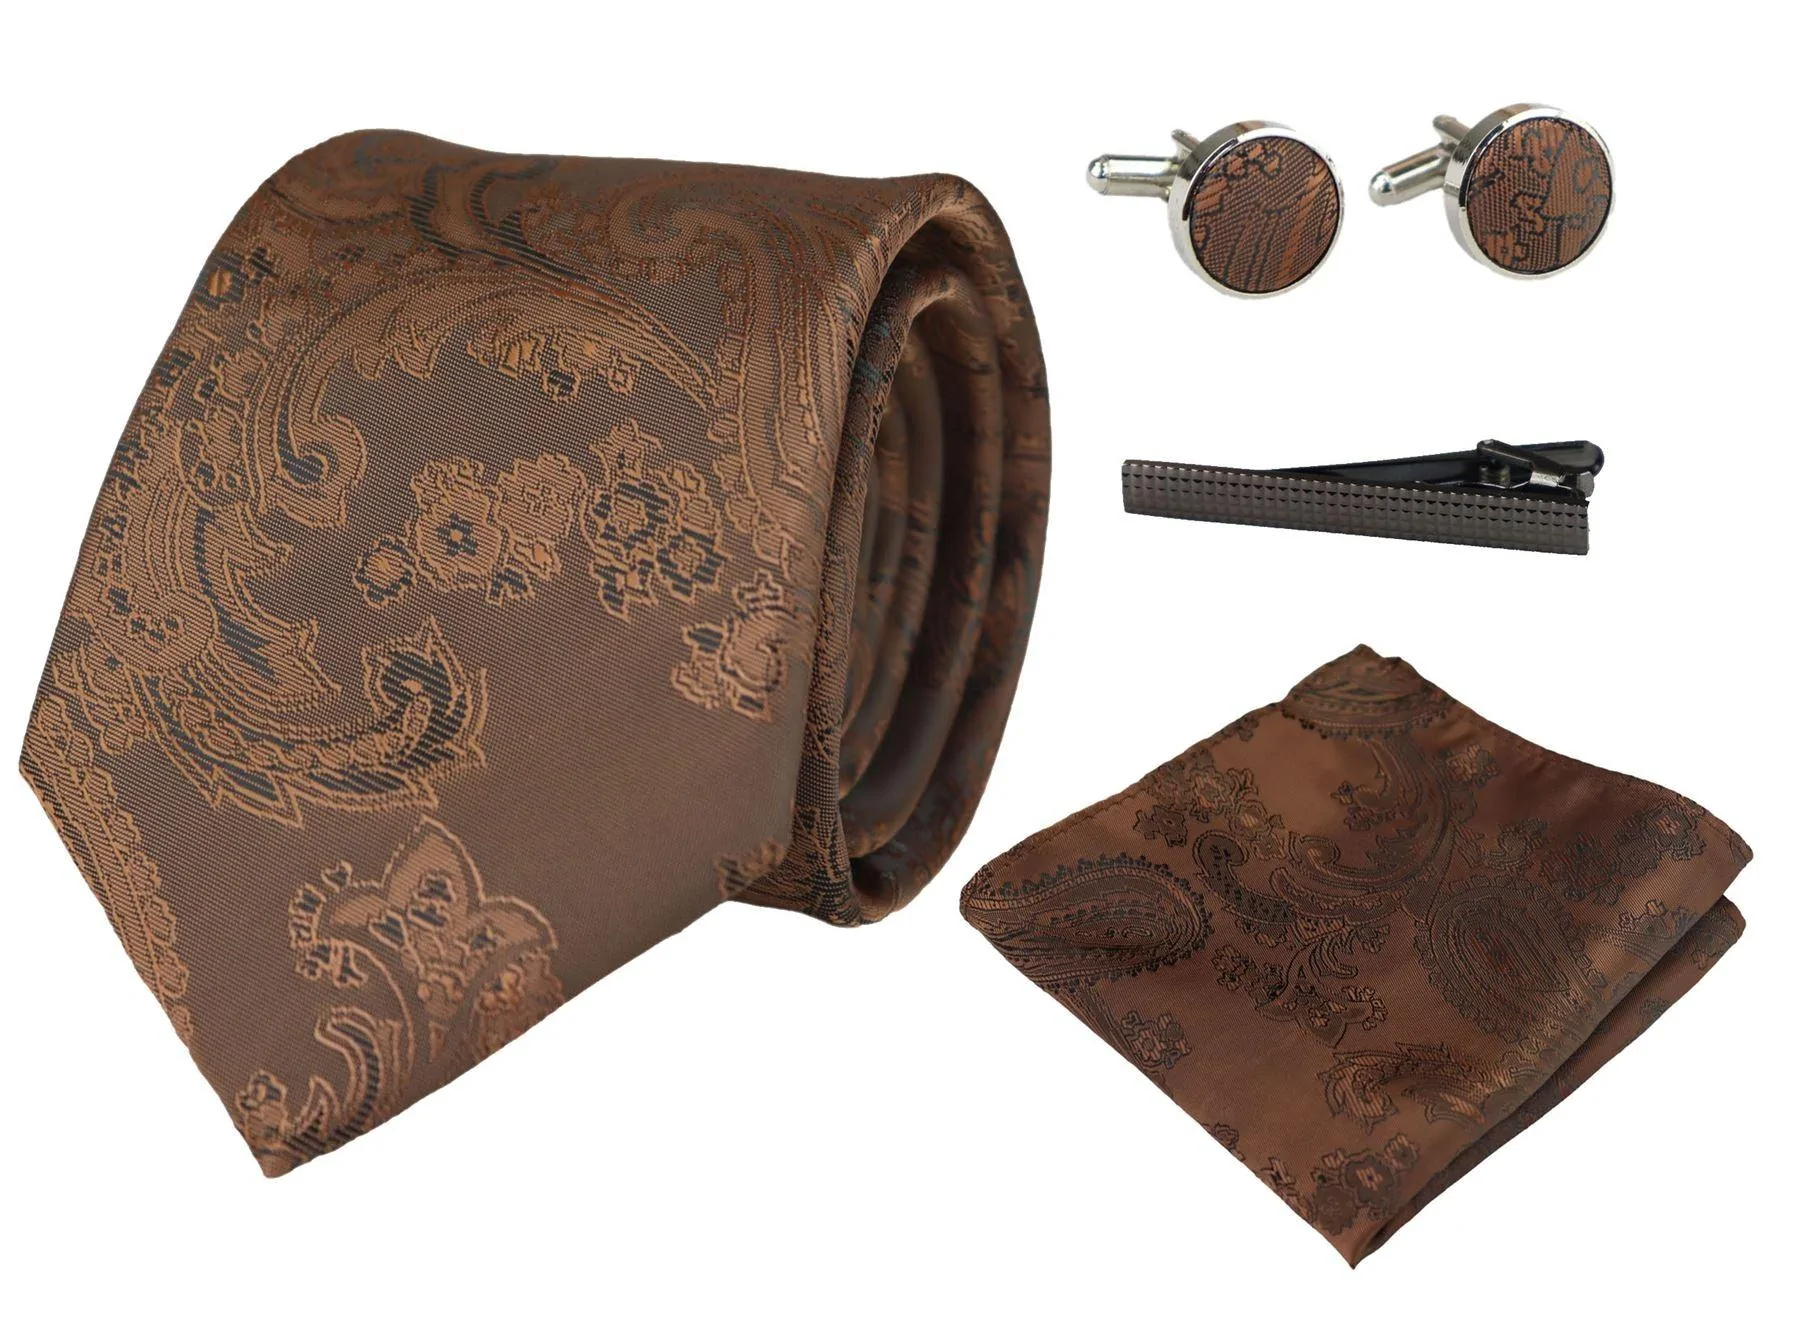 Paisley Neck Brown Tie Gift Set Pocket Square Cuff Links Tie Floral Satin